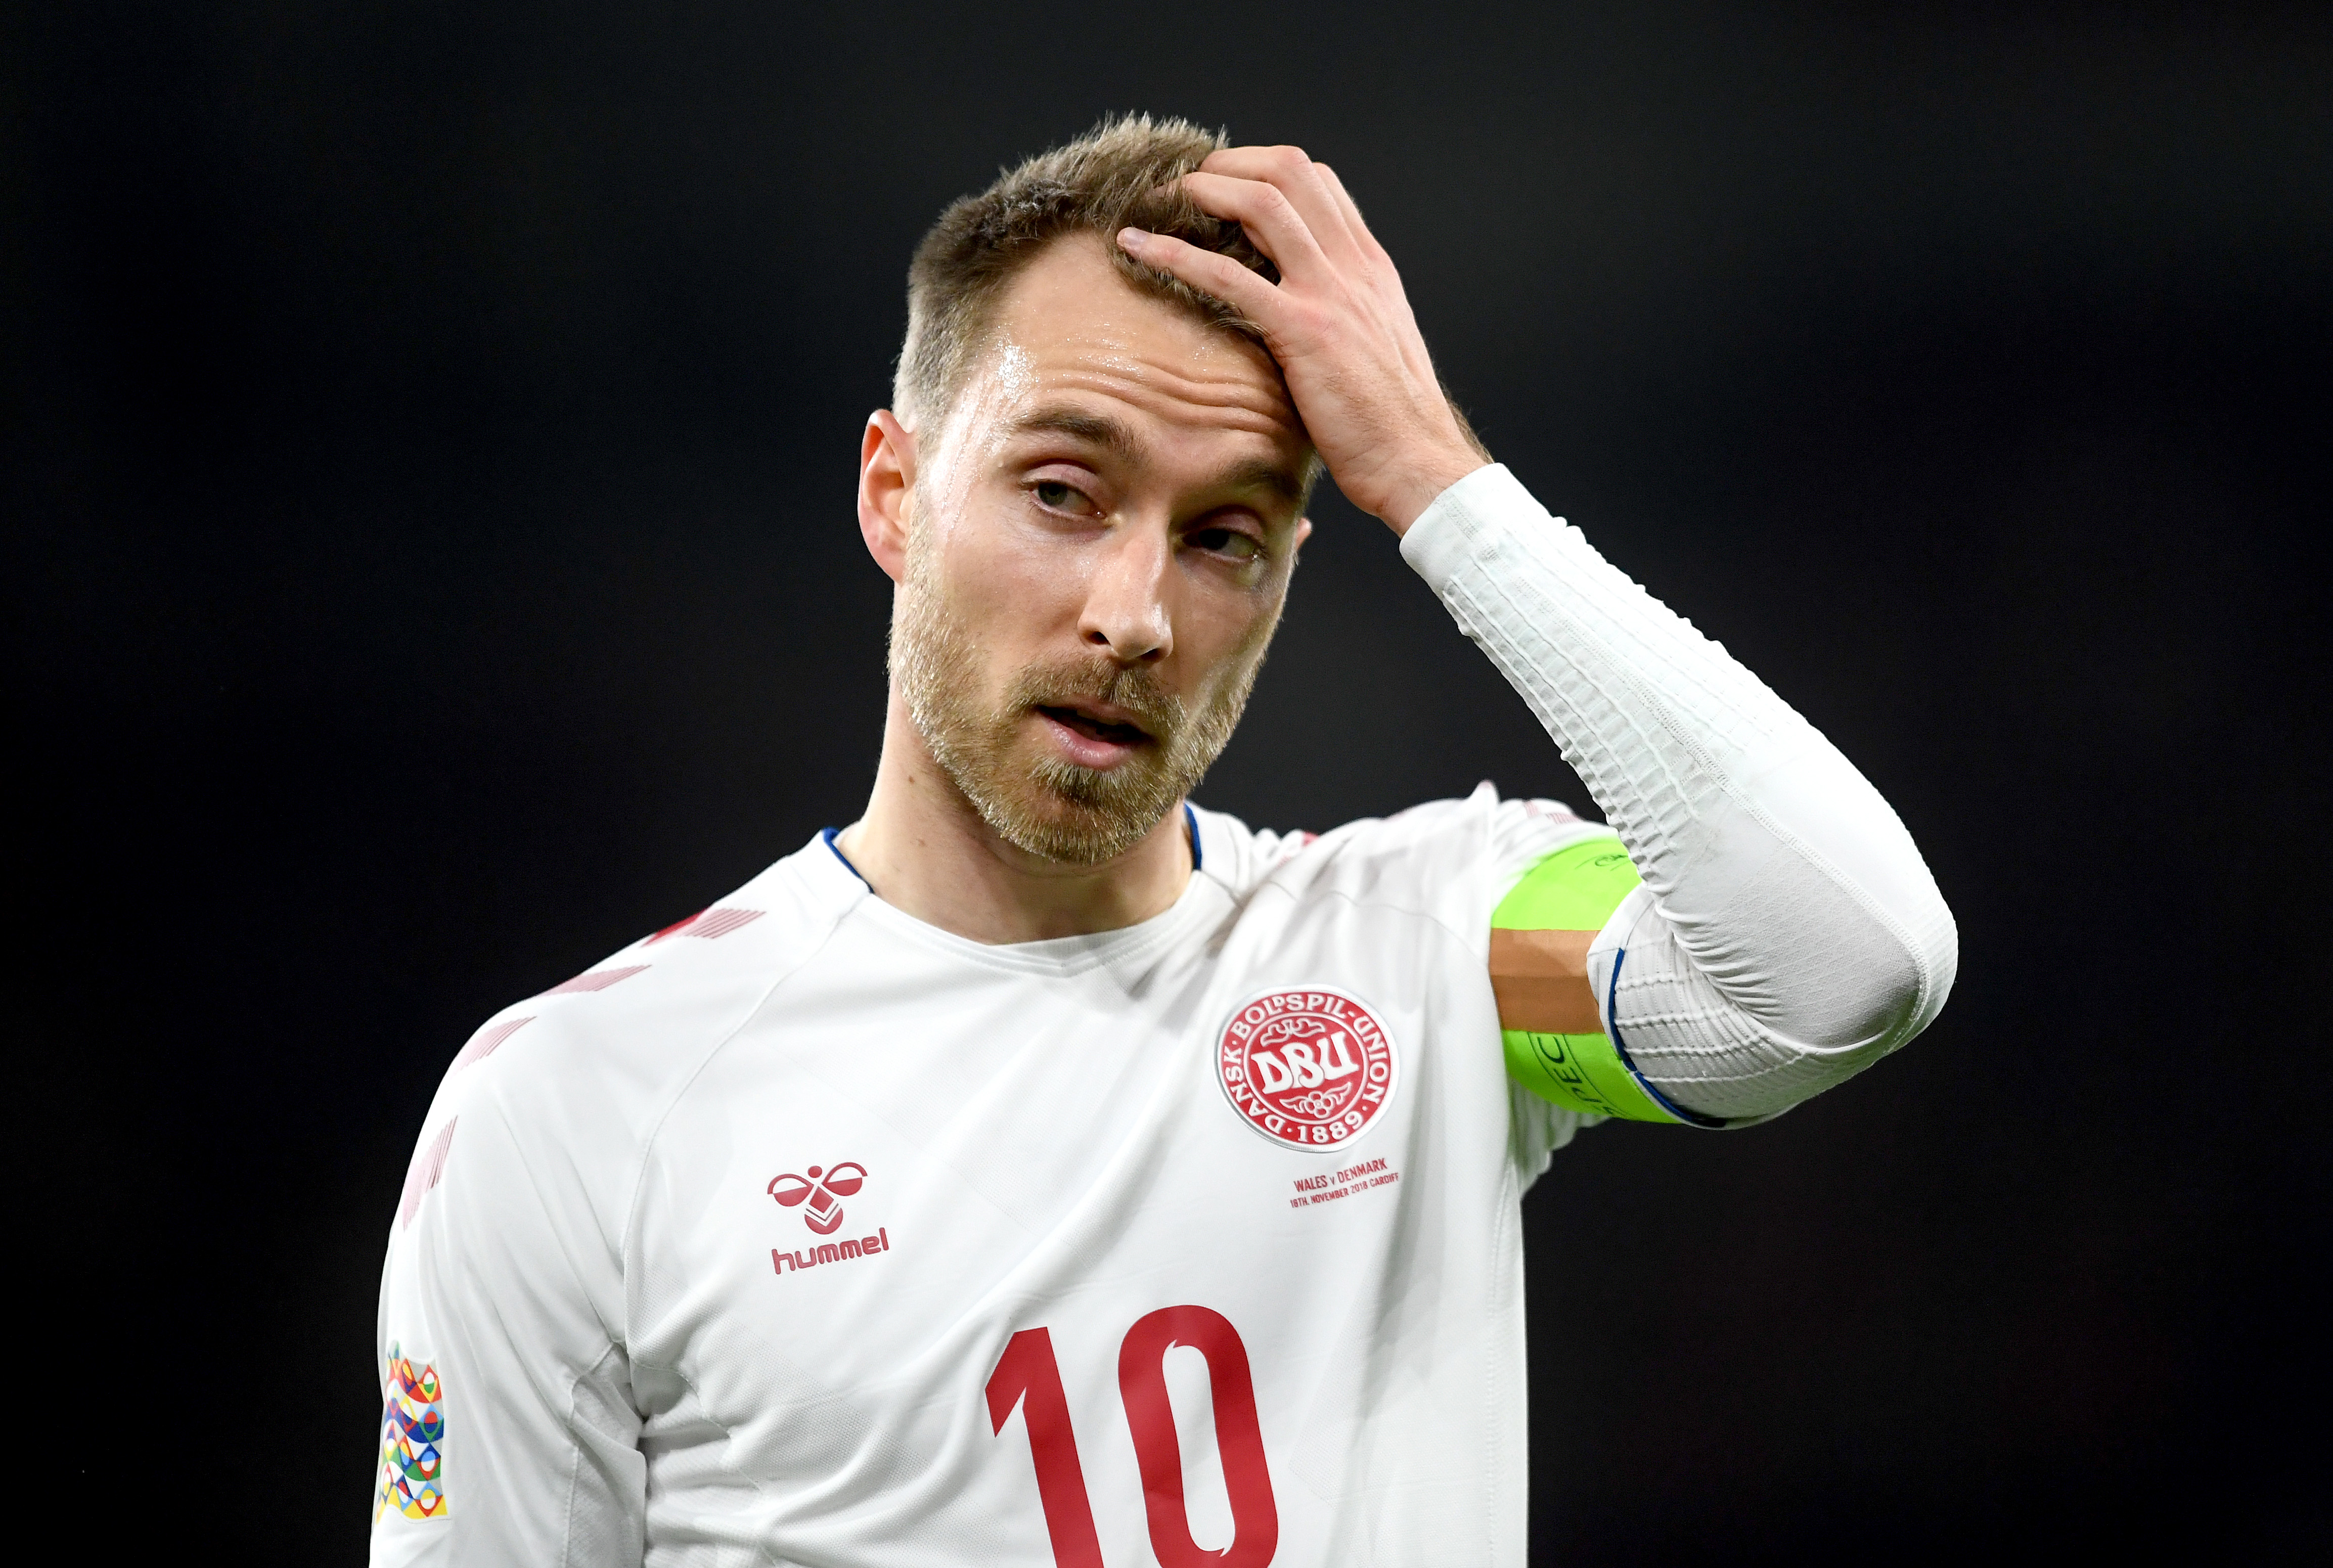 Christian Eriksen will hold the key for Denmark (Photo by Harry Trump/Getty Images)